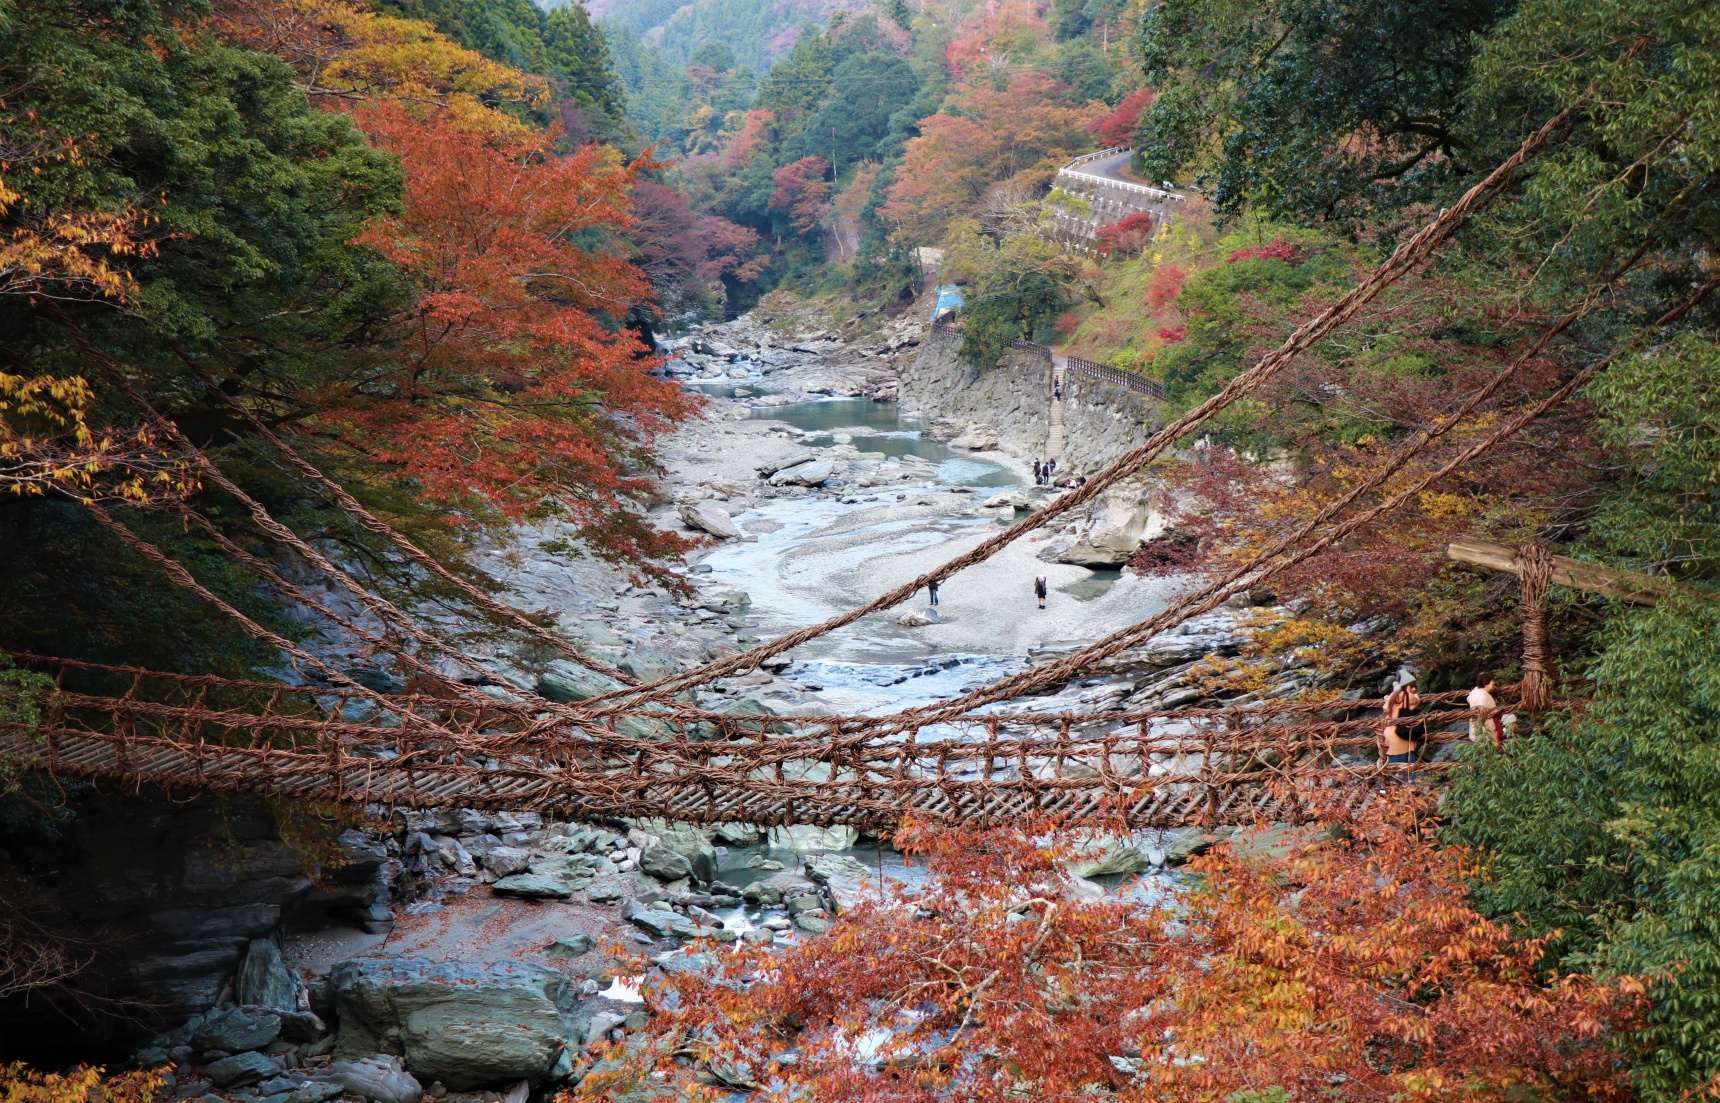 Take a Walk on the Wild Side in Tokushima